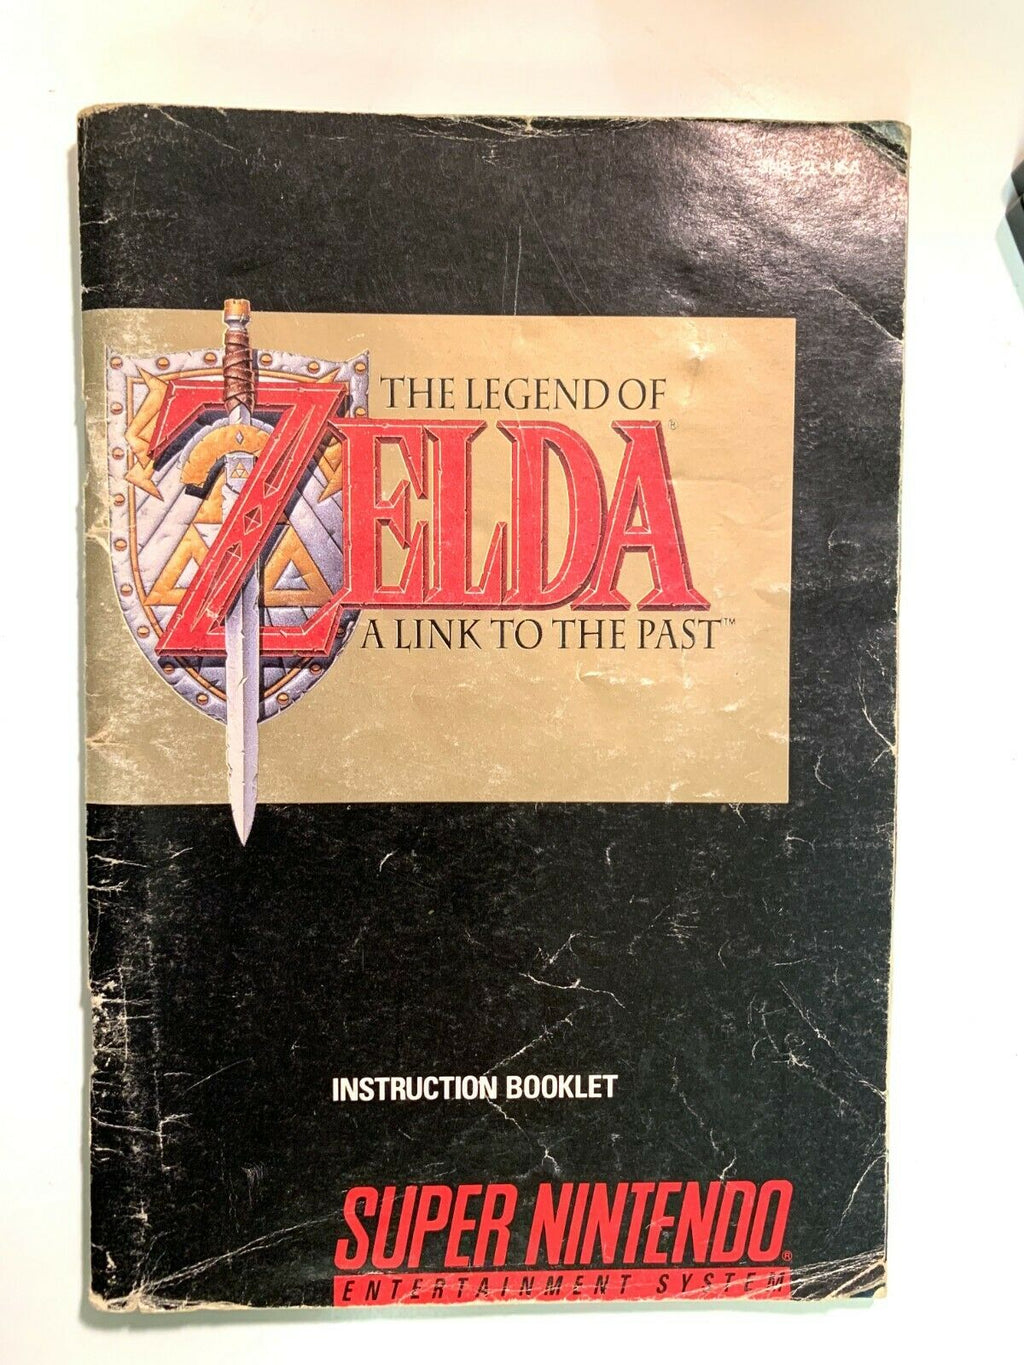 The Legend of Zelda - A Link to the Past (Manual) : Nintendo